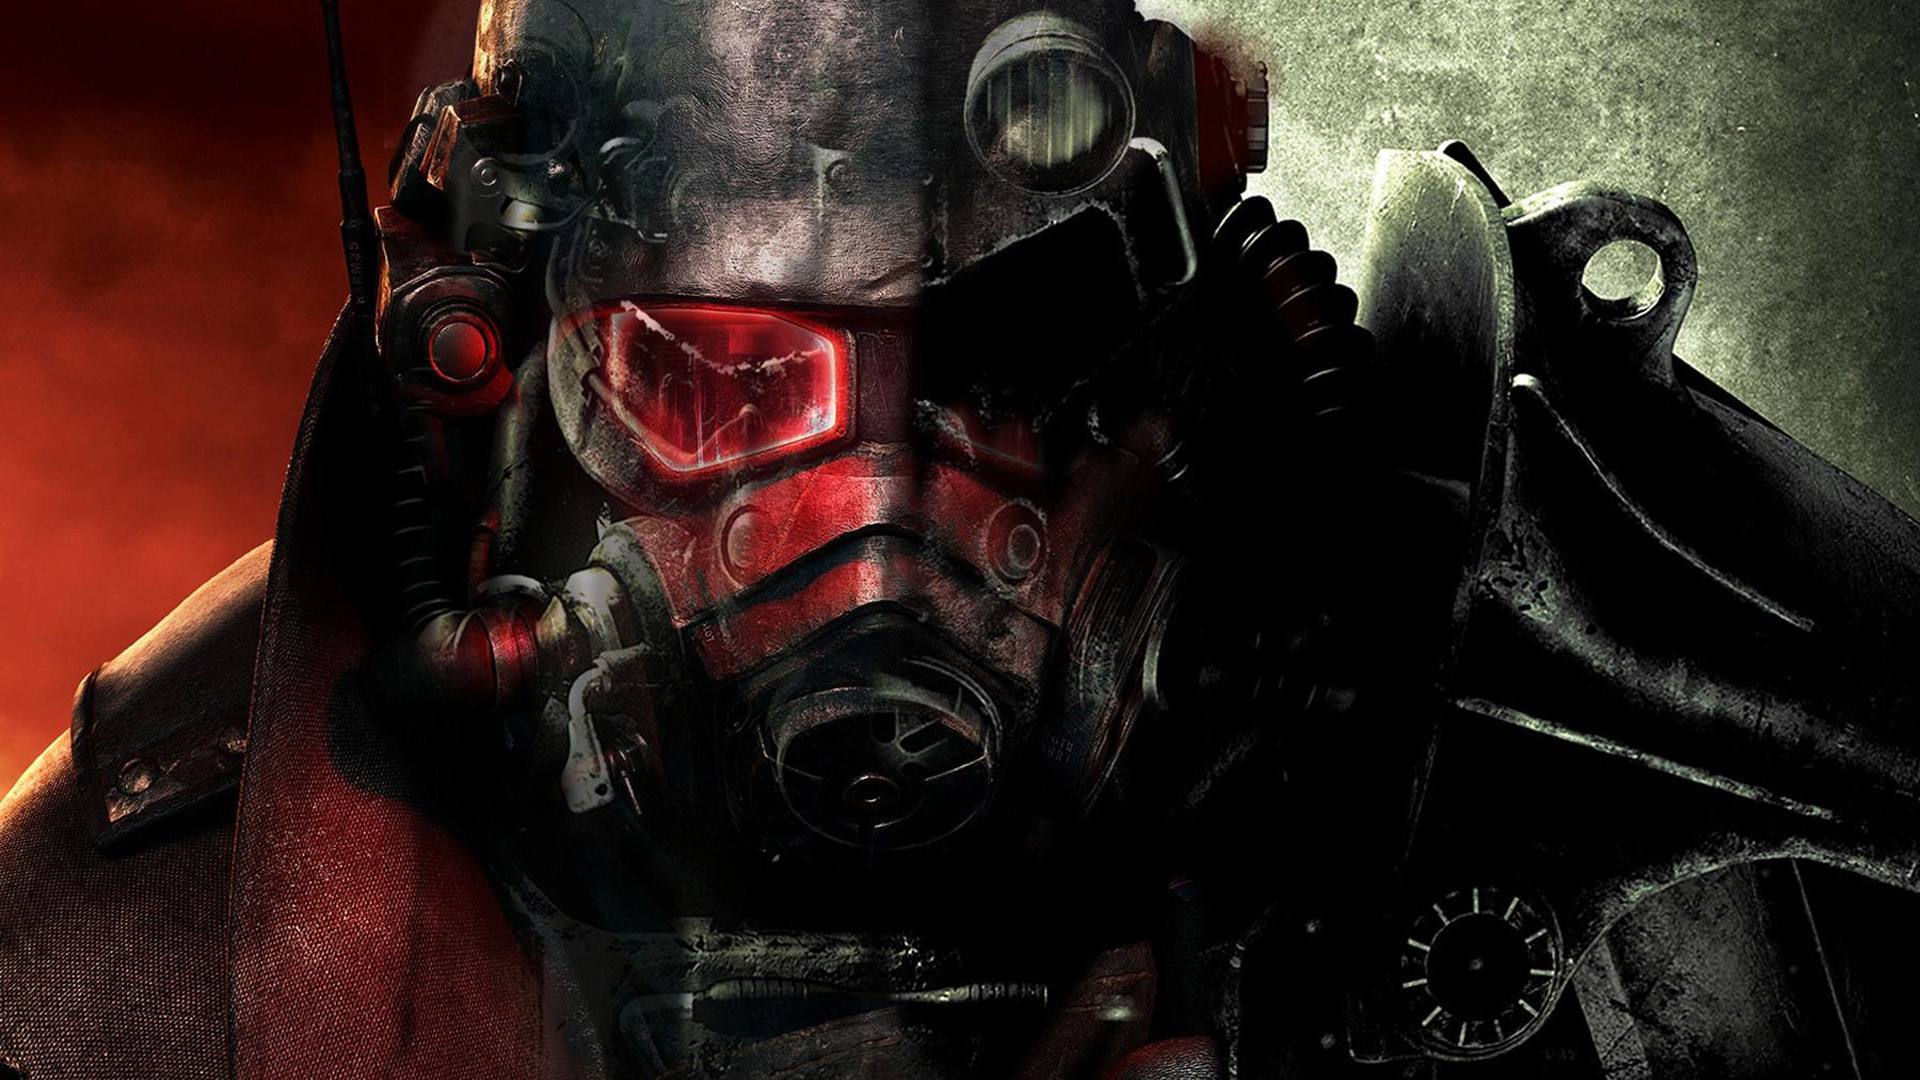 On September 29, 2015 By Stephen Comments Off on Fallout 4 Wallpaper